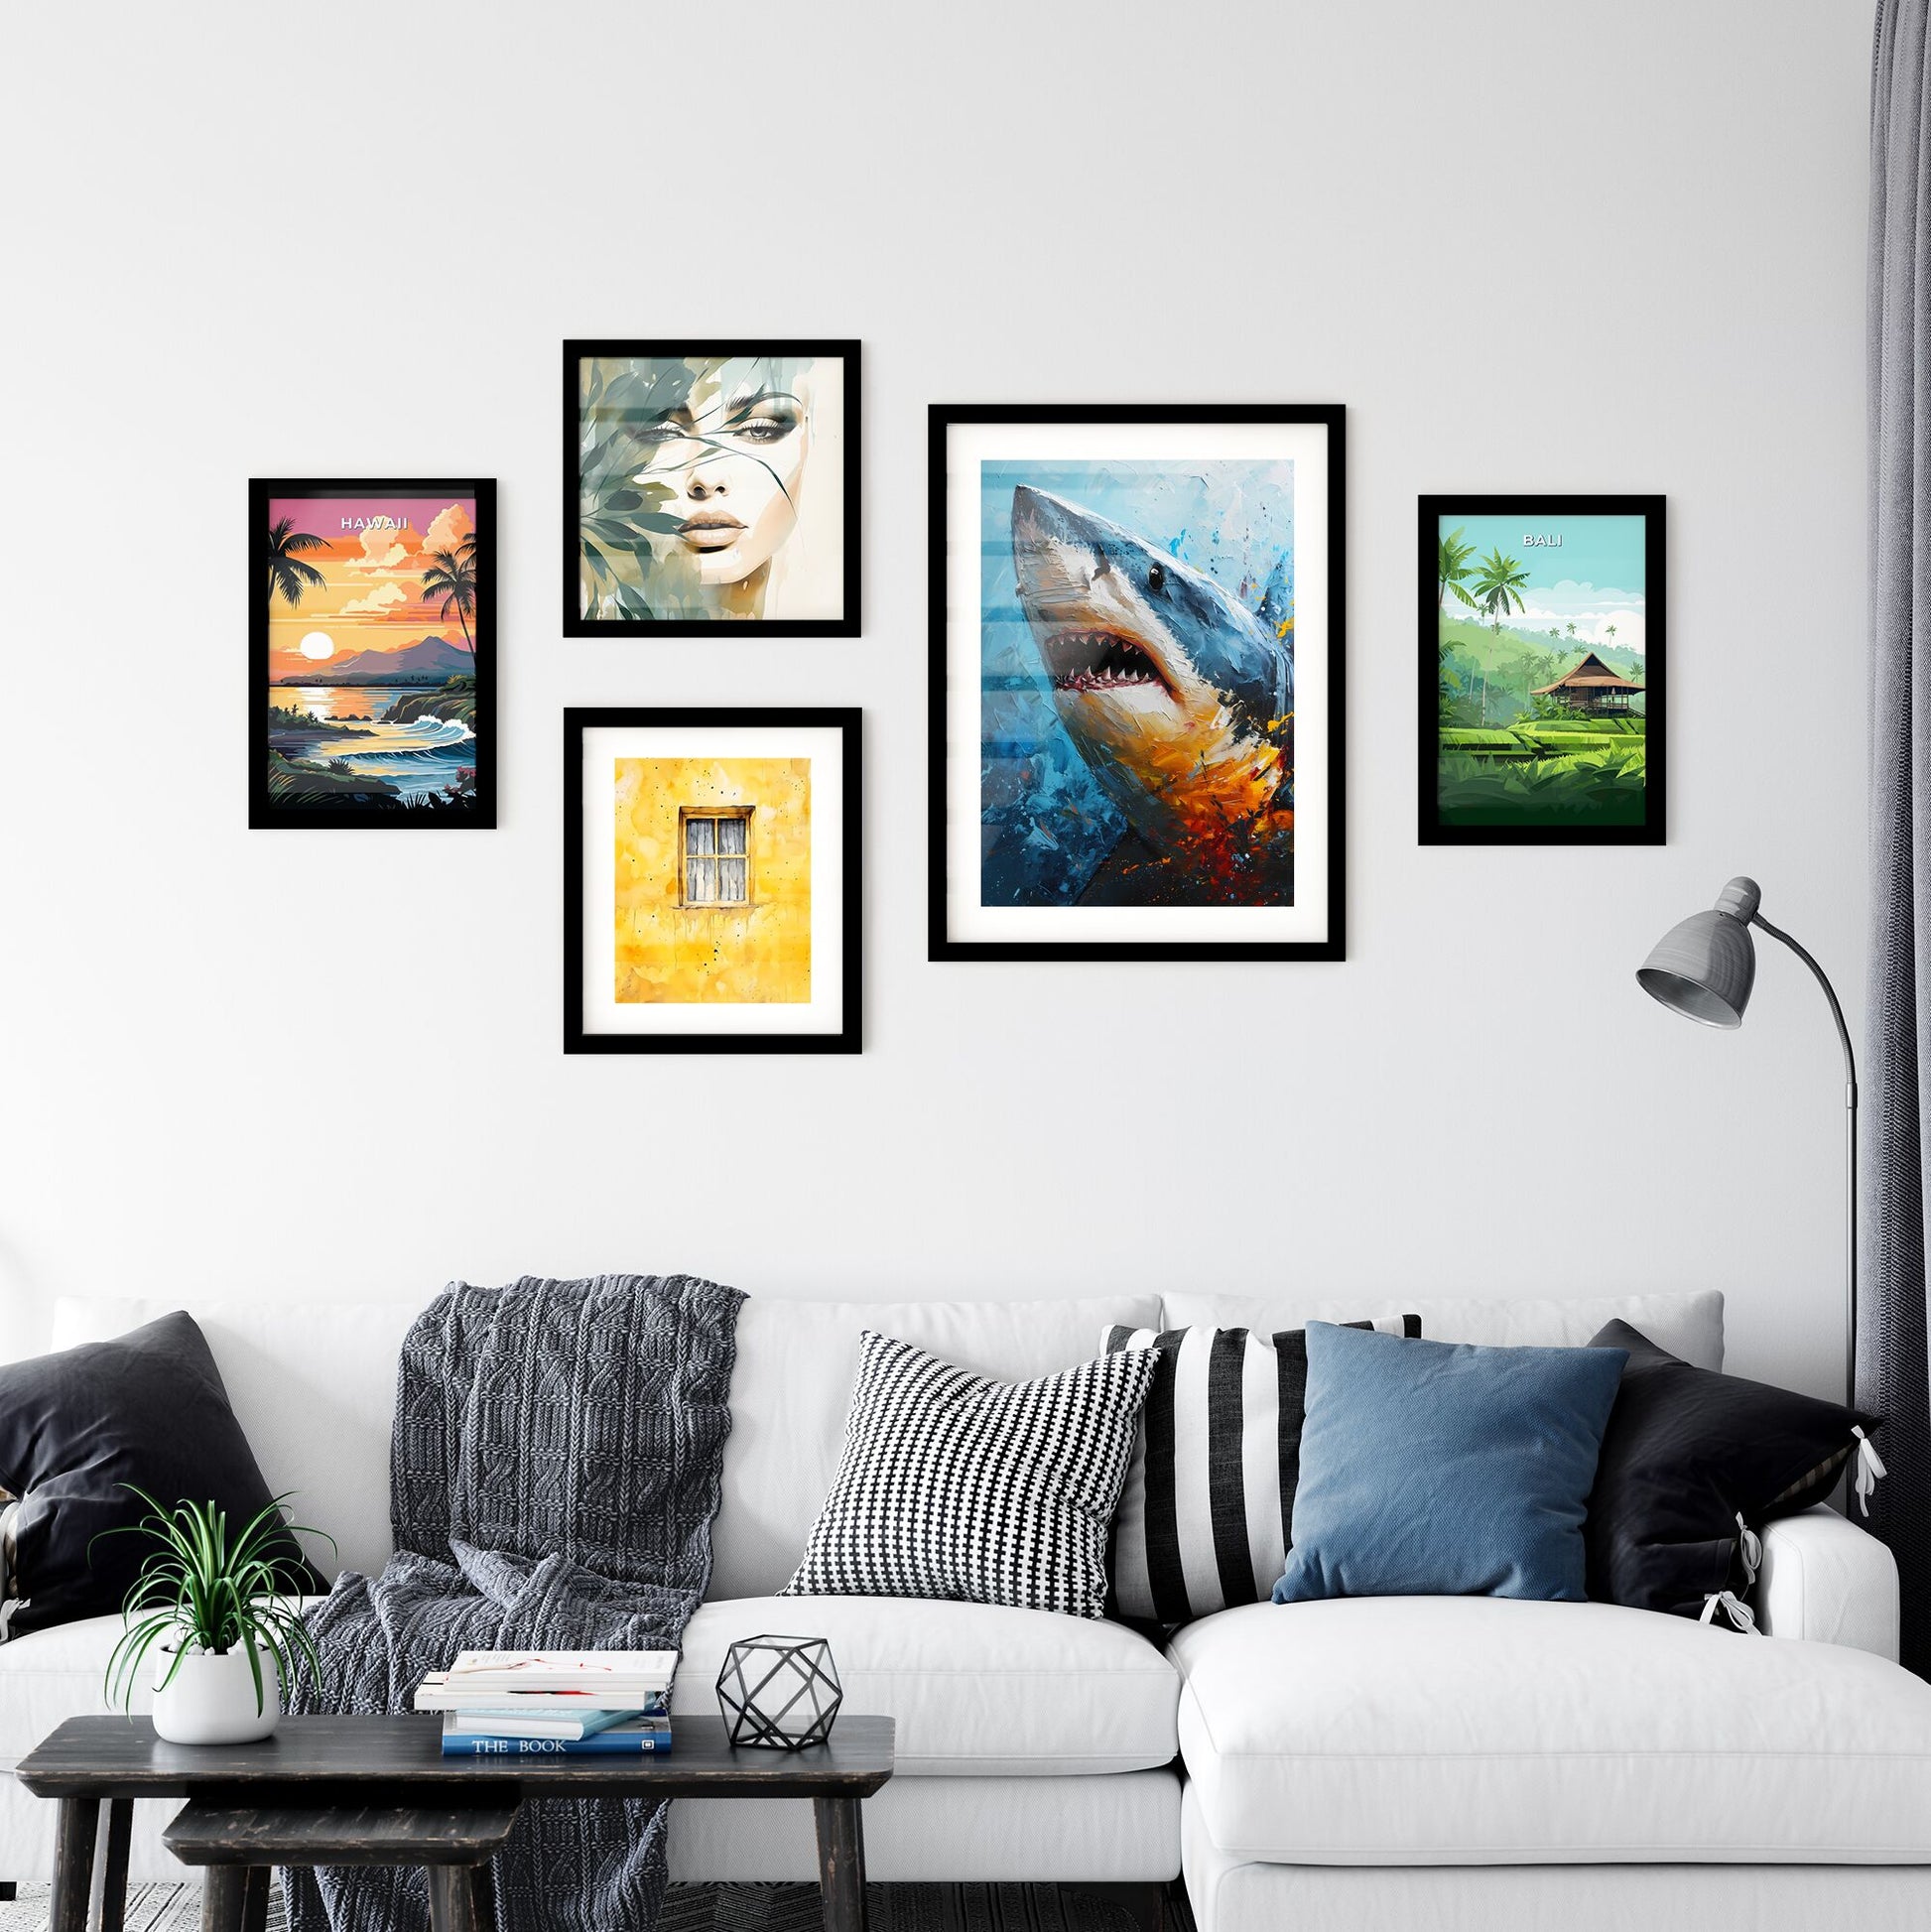 A Poster of The Shark Portrait with colorful Background - A Painting Of A Shark Default Title